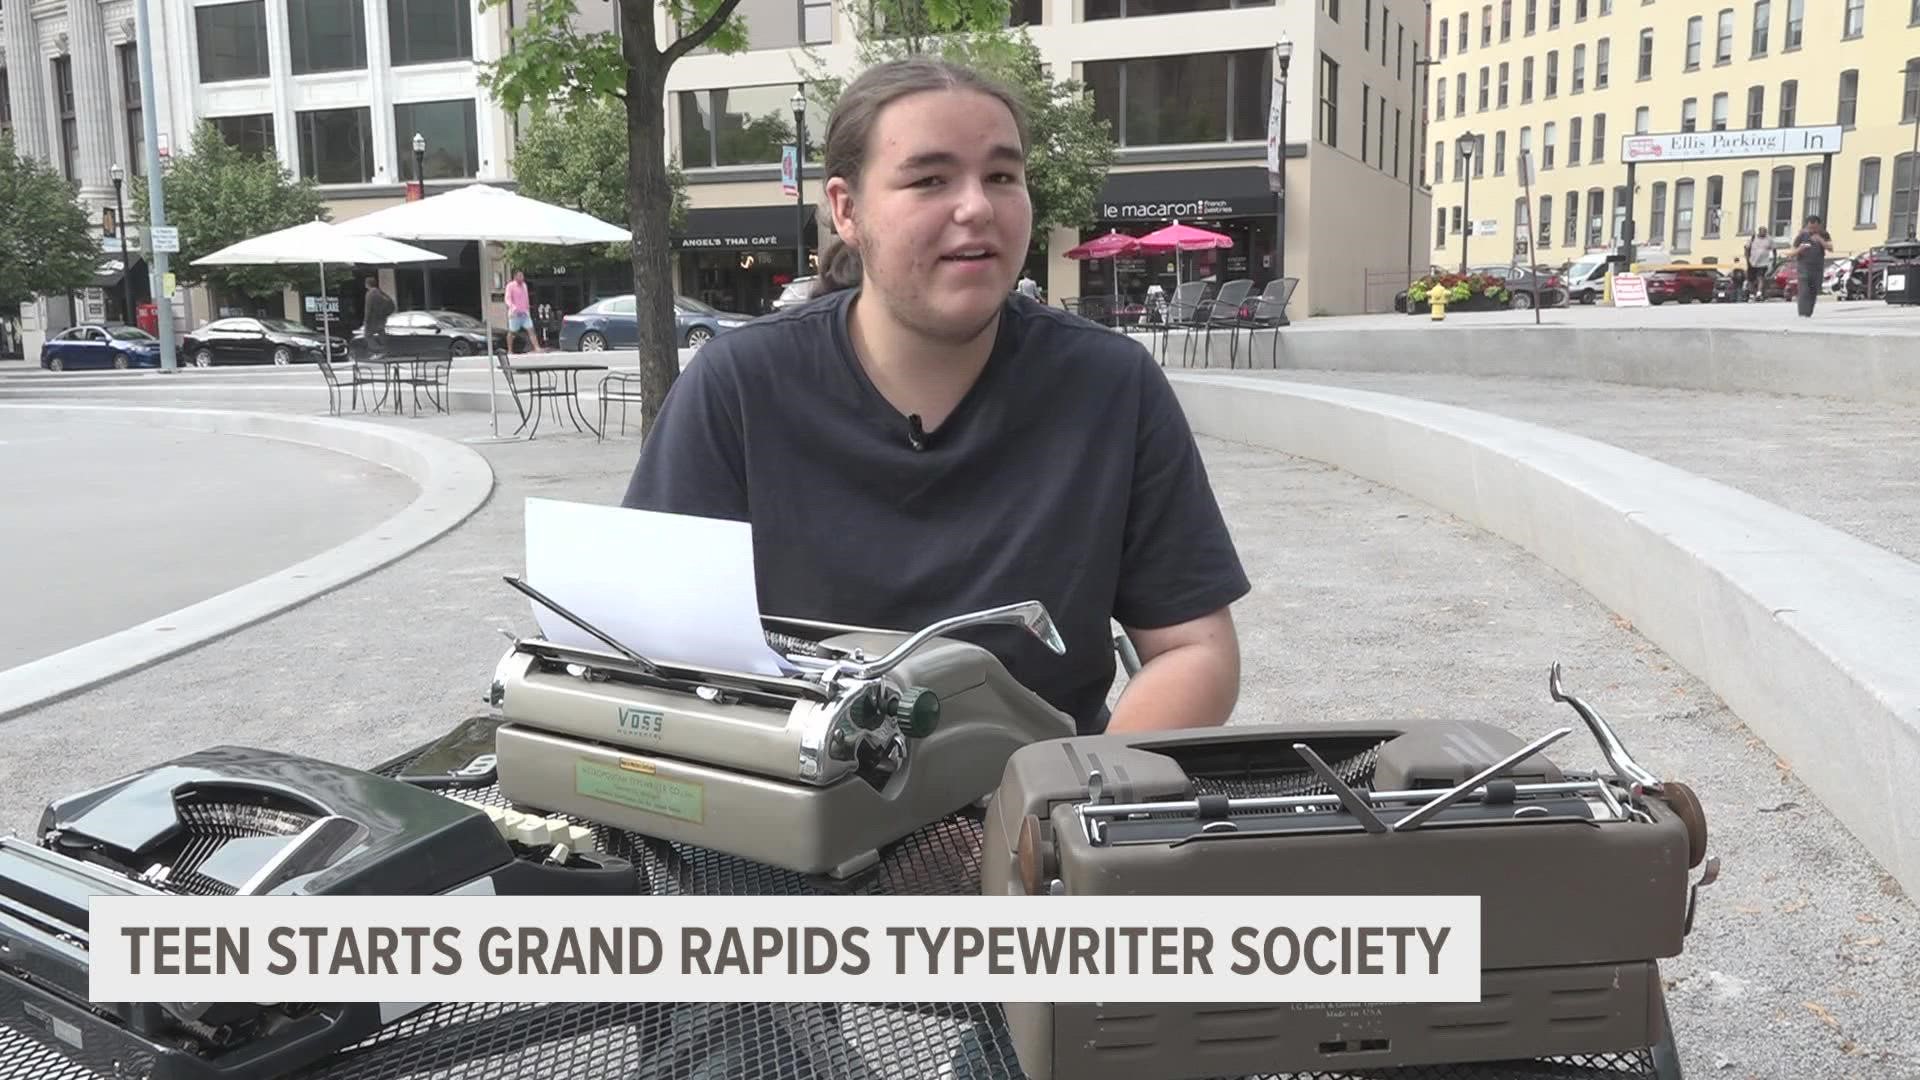 It's a sound you don't hear much anymore. But the click clack of a typewriter is music to Esteban Clark-Braendle's ears.